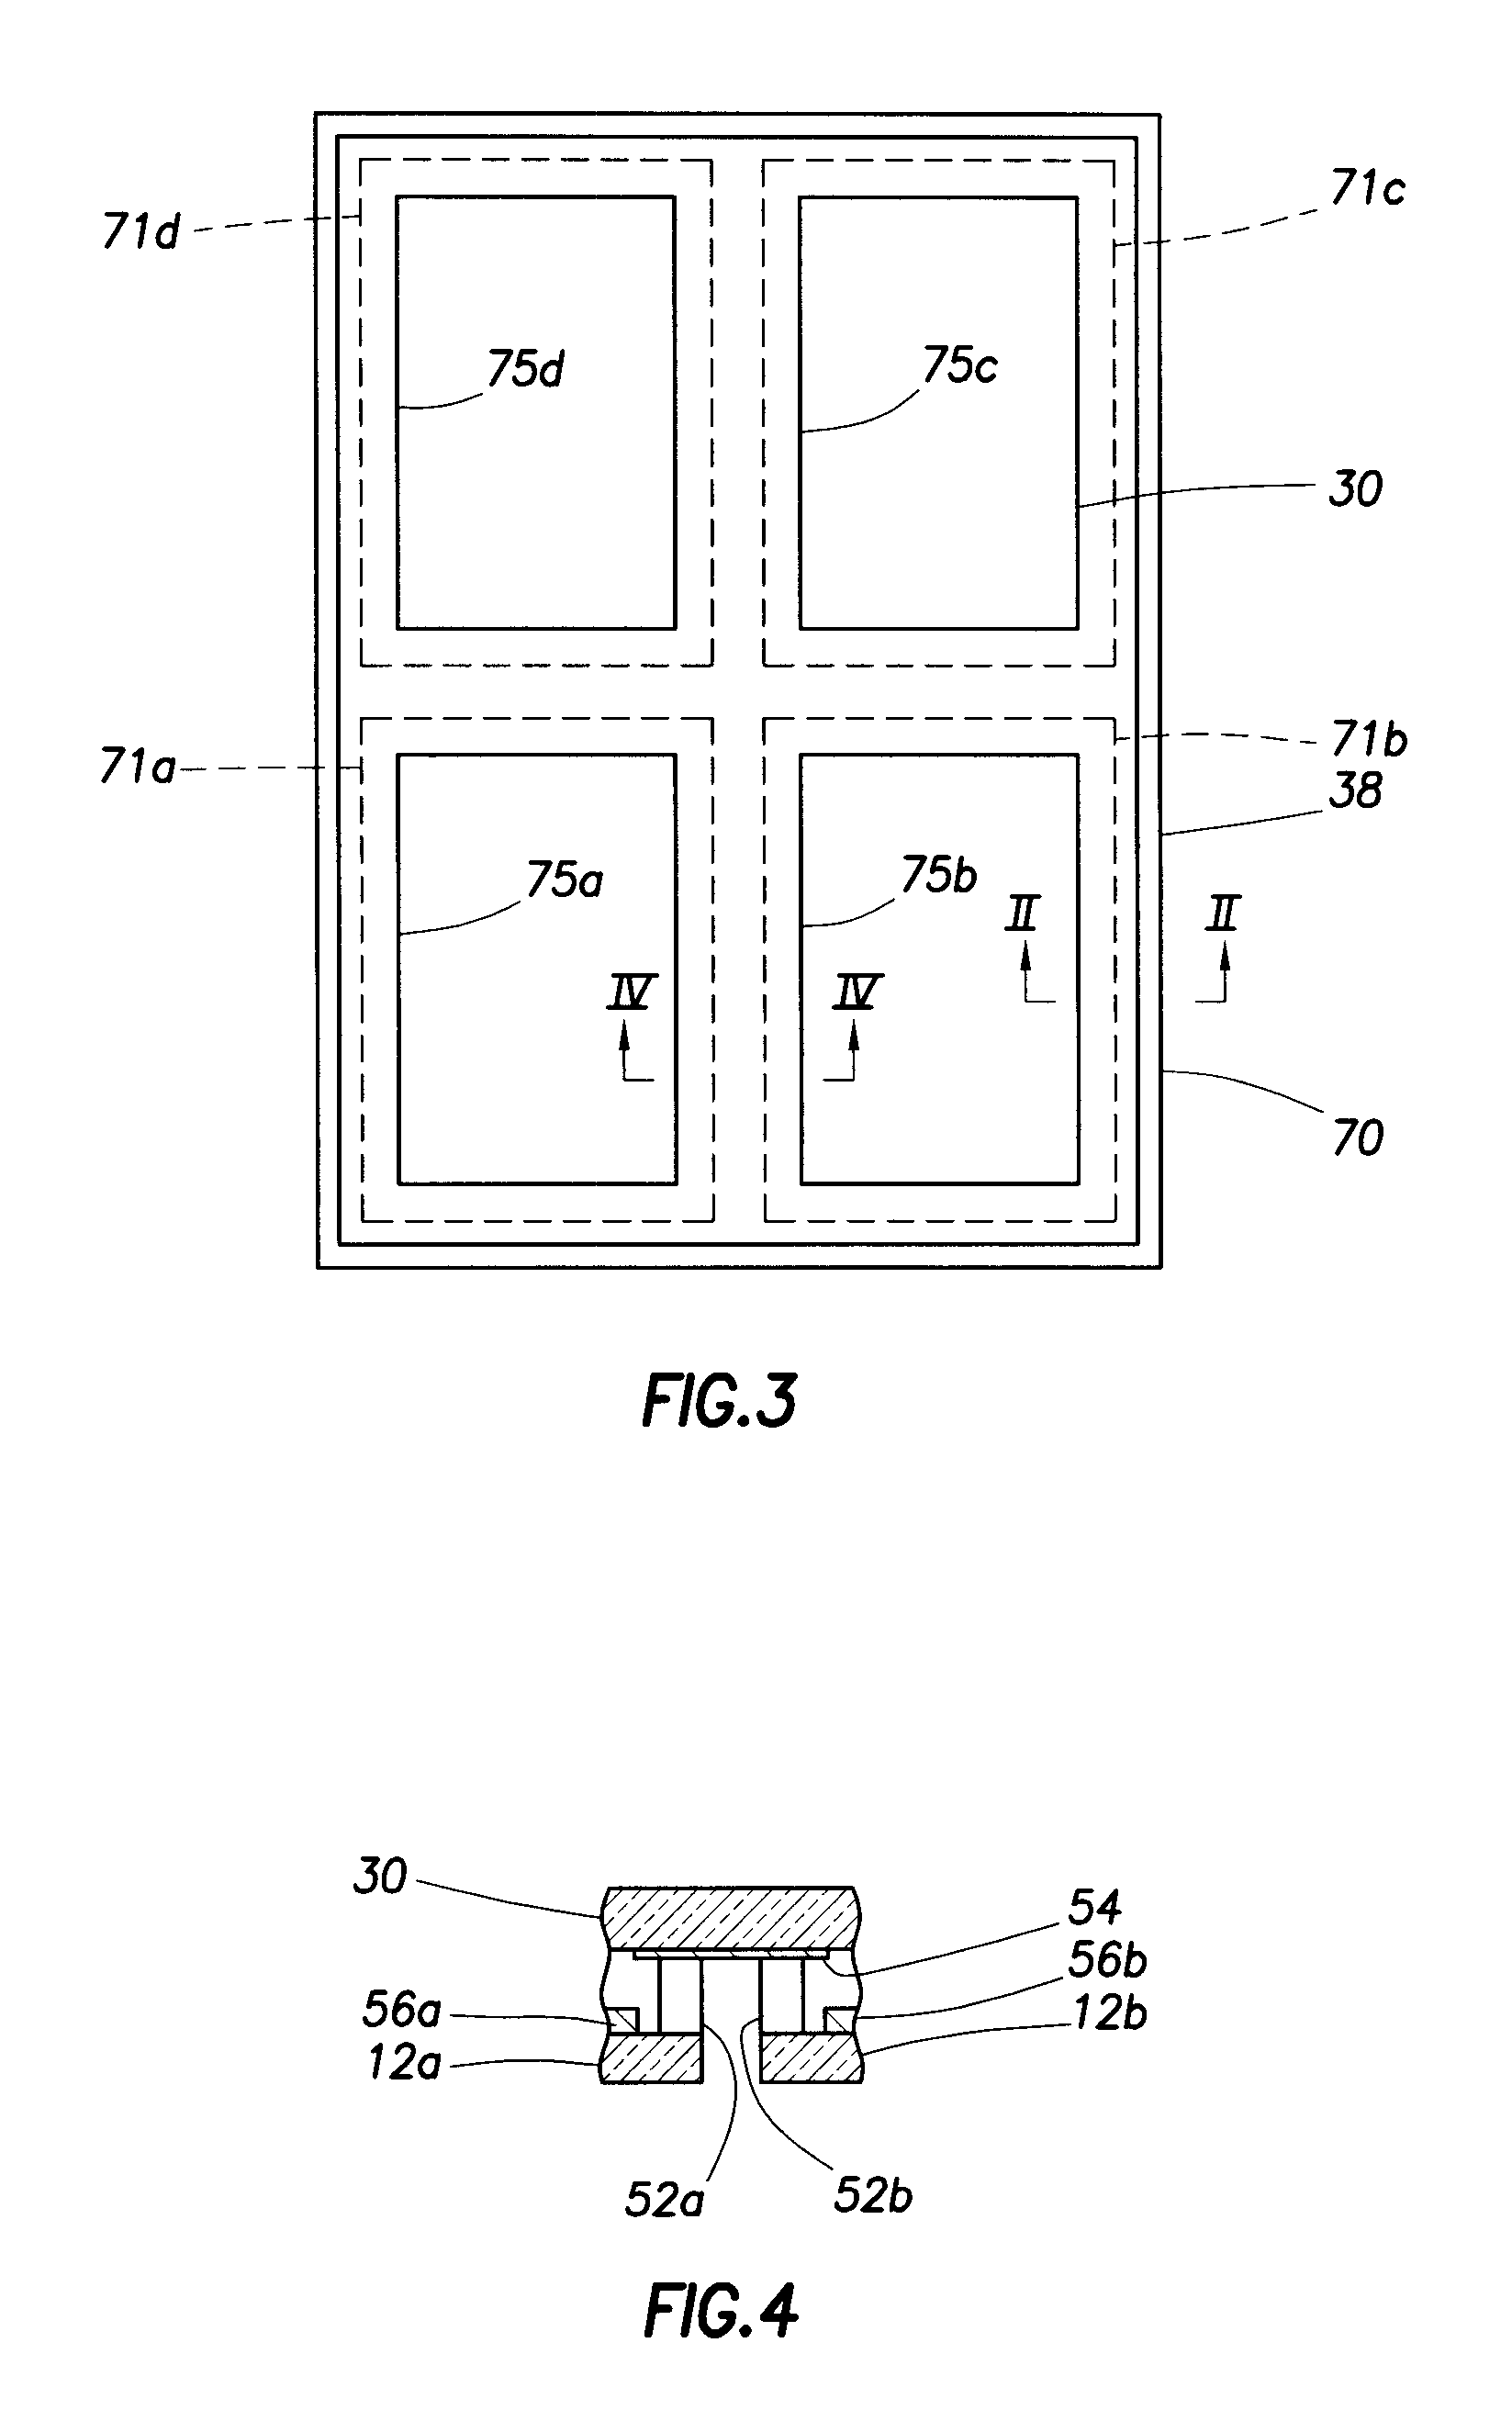 Photovoltaic device and method for encapsulating